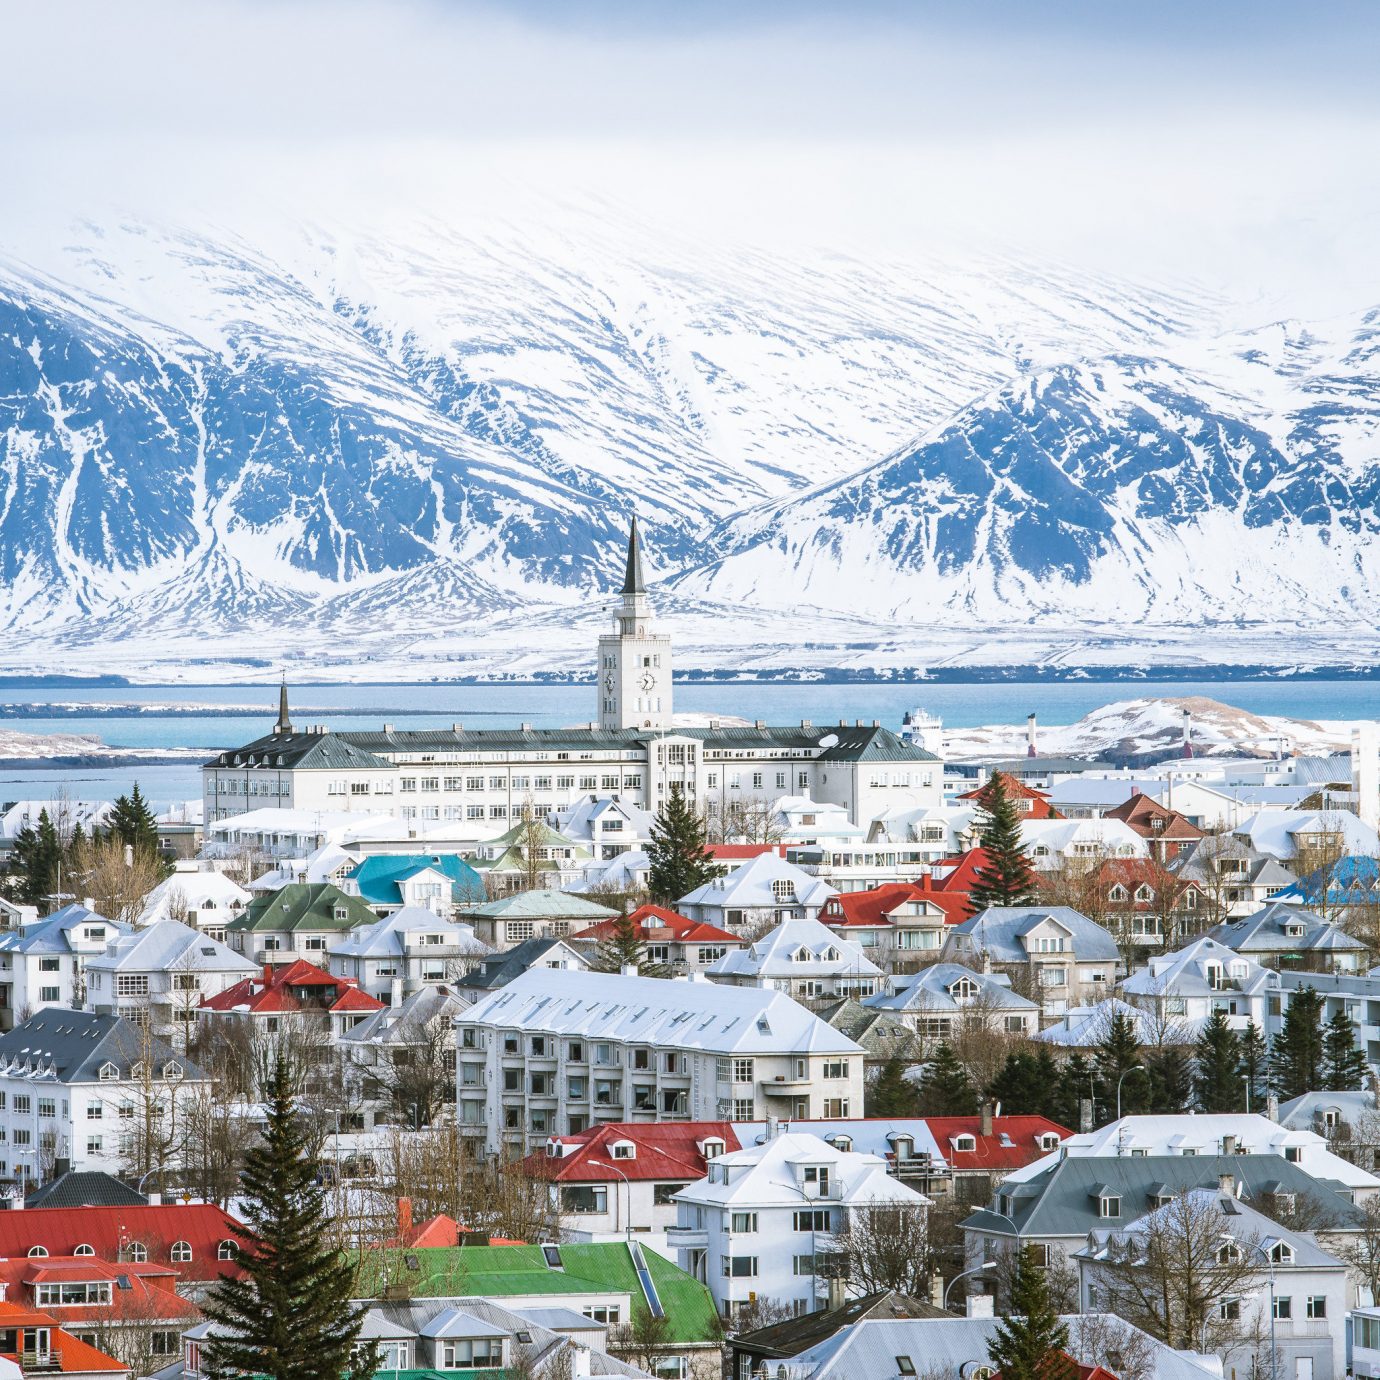 Boutique Hotels Hotels Iceland Reykjavík Winter snow mountain range Town mountain sky alps City glacial landform tourist attraction tourism arctic tree mountain village water mount scenery Village landscape Lake fell freezing house